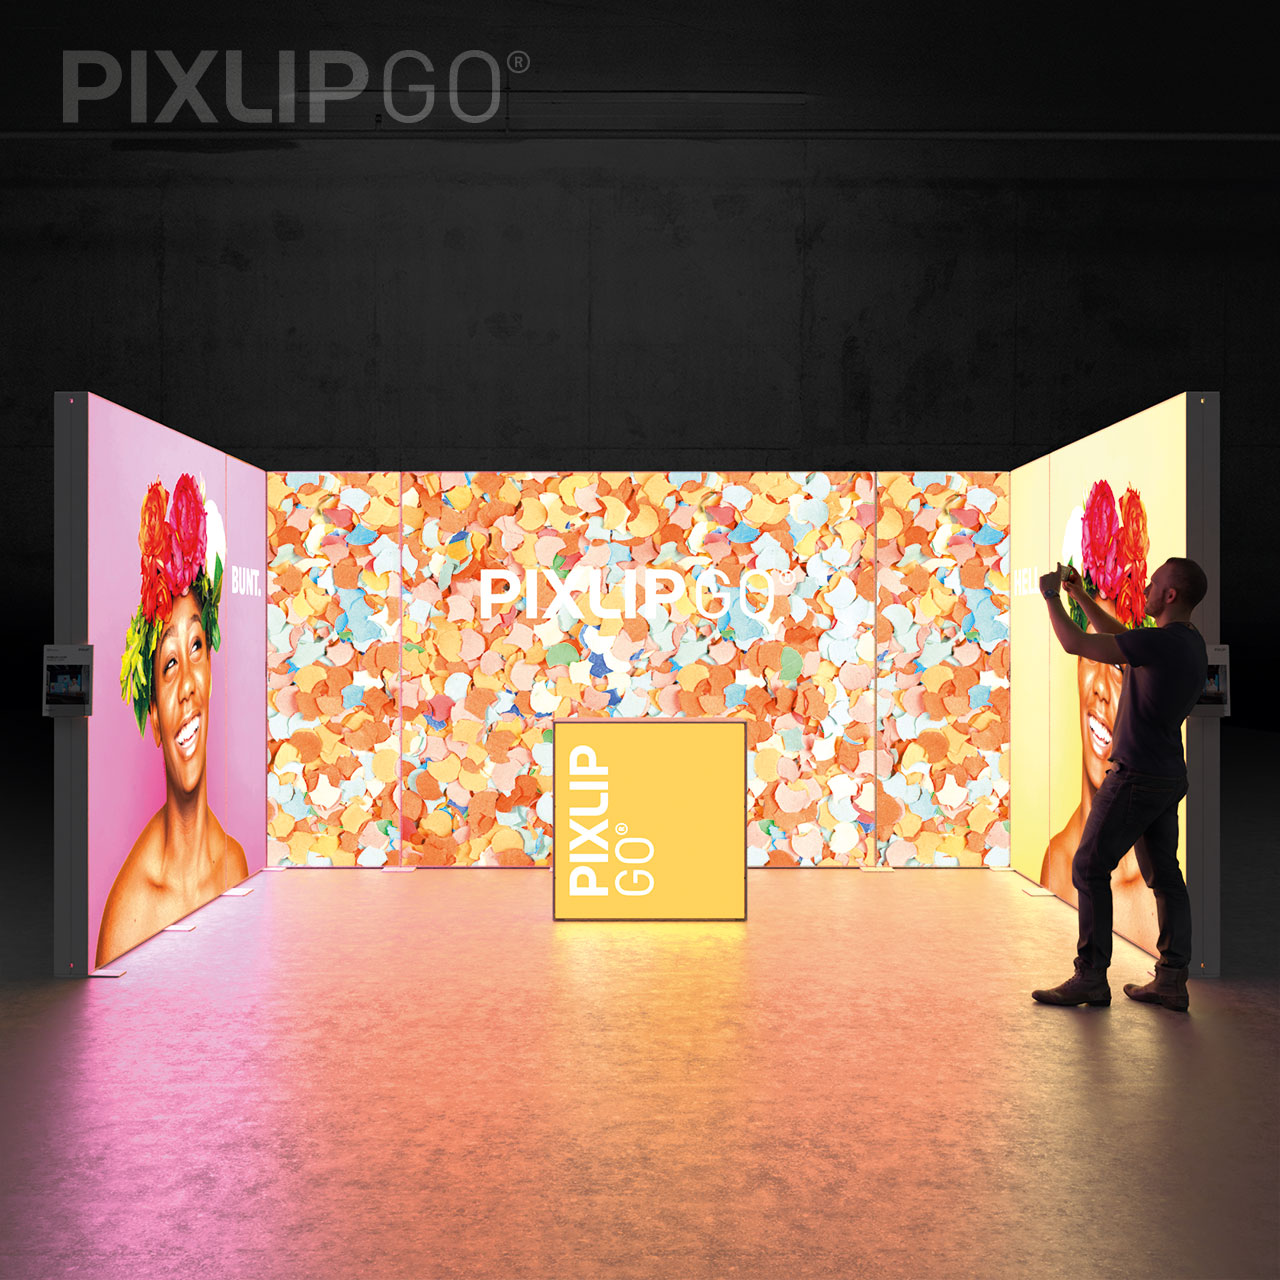 LED Messestand Pixlip GO STAND RL5030